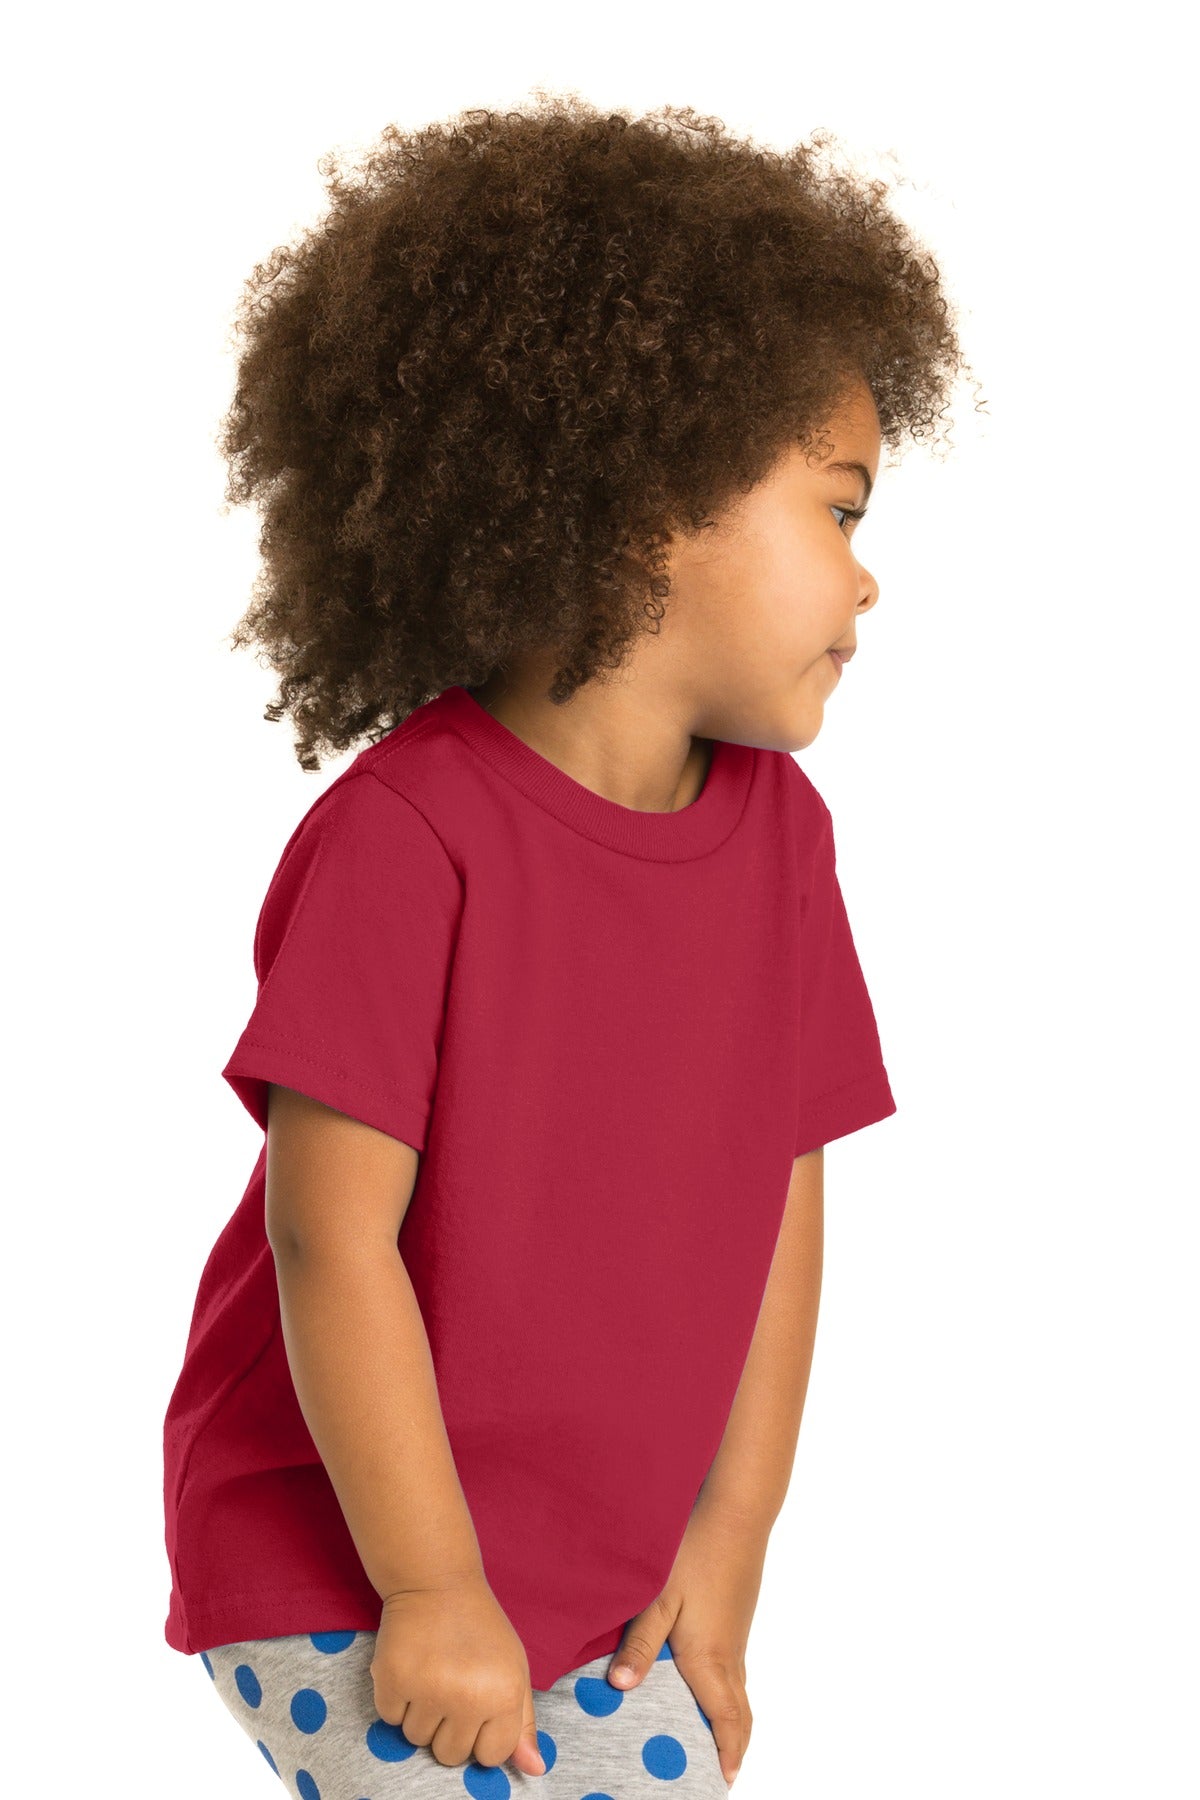 Port & Company Toddler Core Cotton Tee. CAR54T - Red